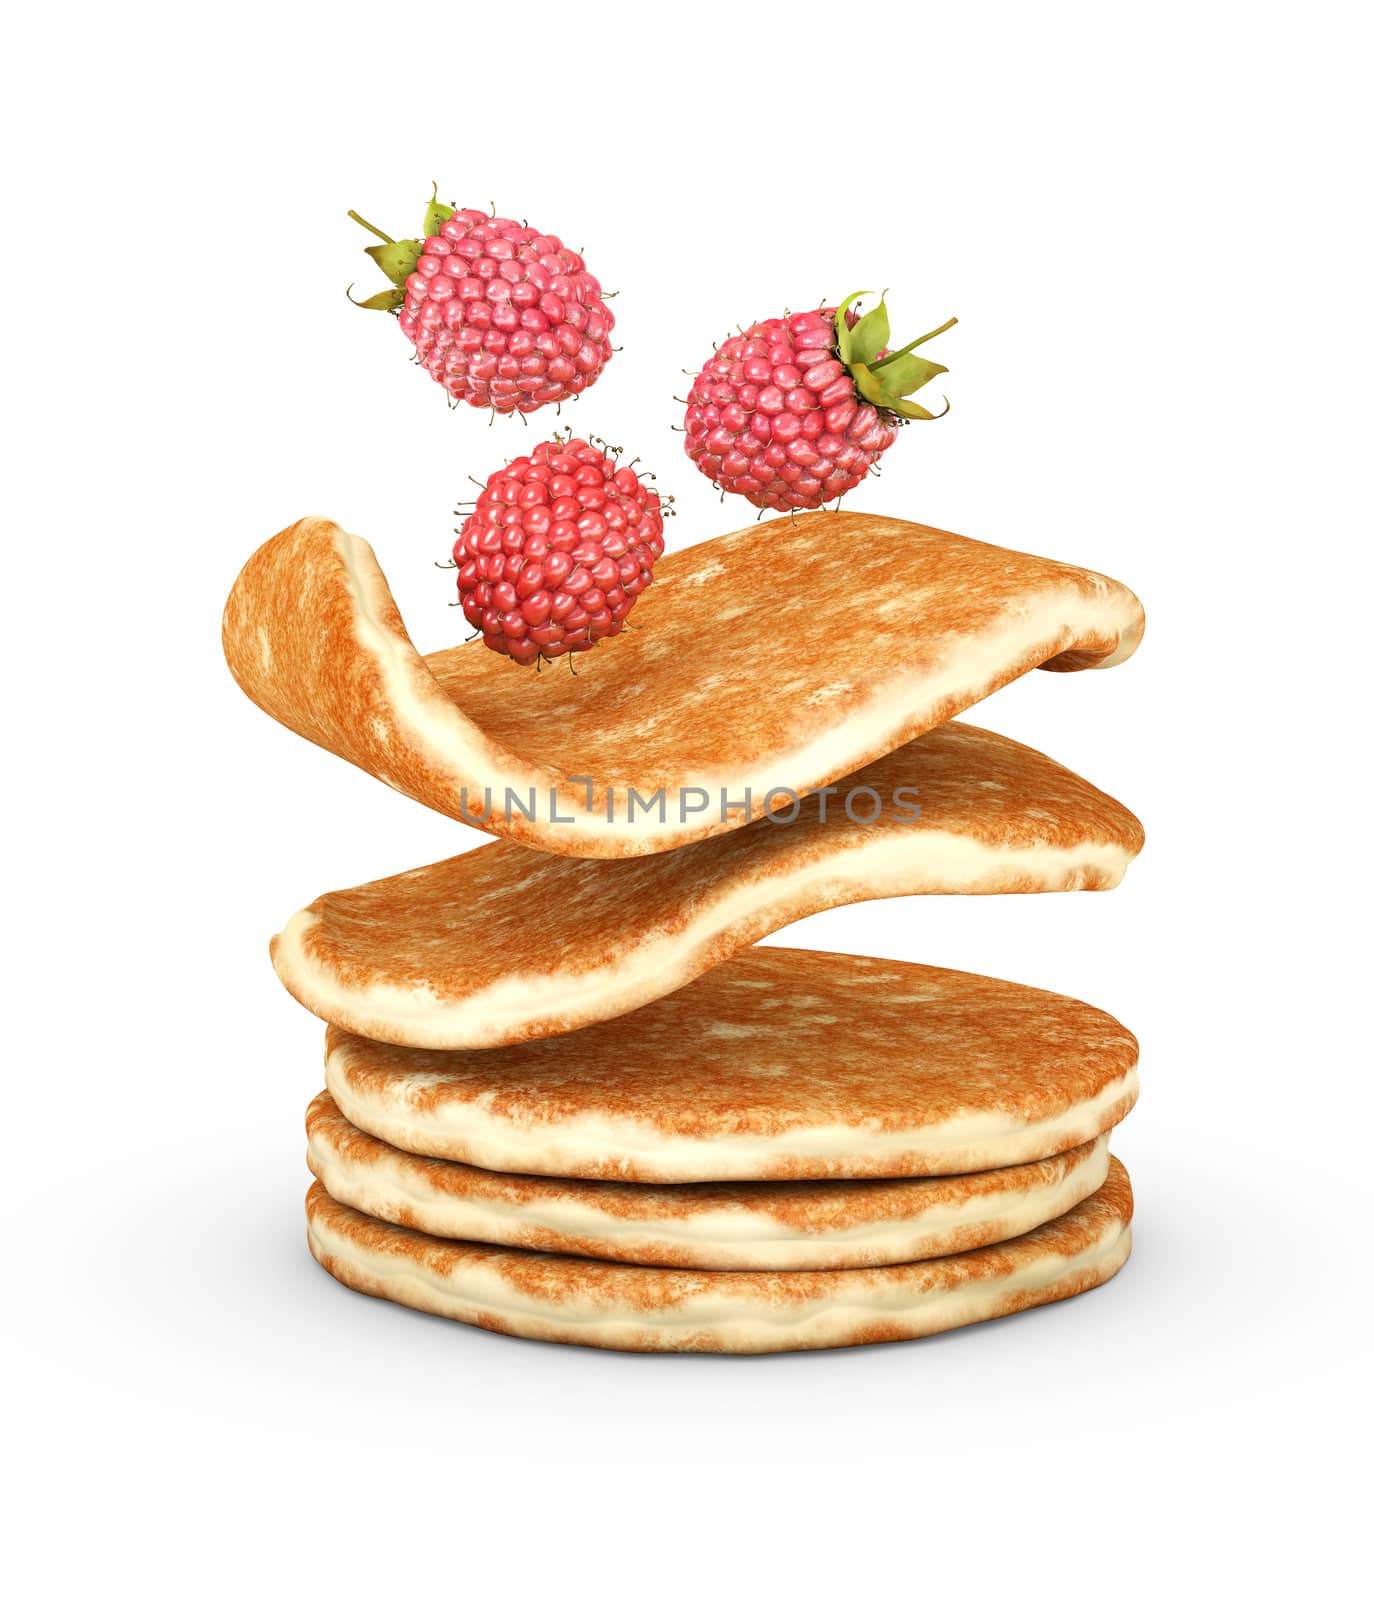 3d Illustration of pancake with fresh raspberries isolated on white background by tussik